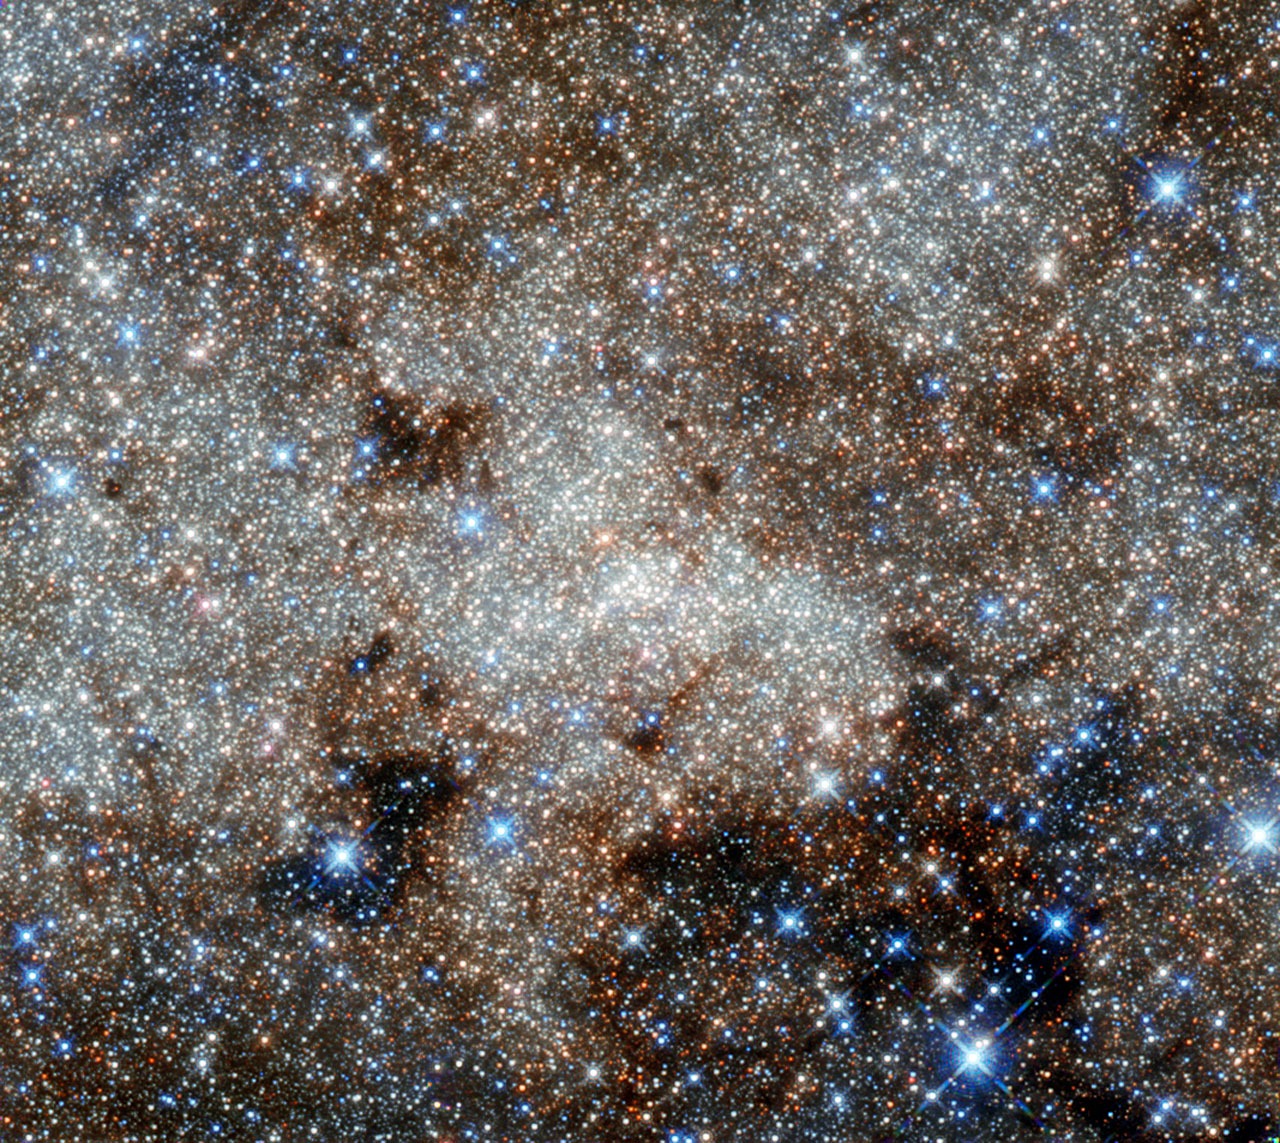 This image shows the star-studded center of the Milky Way towards the constellation of Sagittarius. The most famous cosmic object in this image still remains invisible: the monster at our galaxy’s heart called Sagittarius A*. Astronomers have observed stars spinning around this supermassive black hole (located right in the center of the image), and the black hole consuming clouds of dust as it affects its environment with its enormous gravitational pull. Credit: NASA